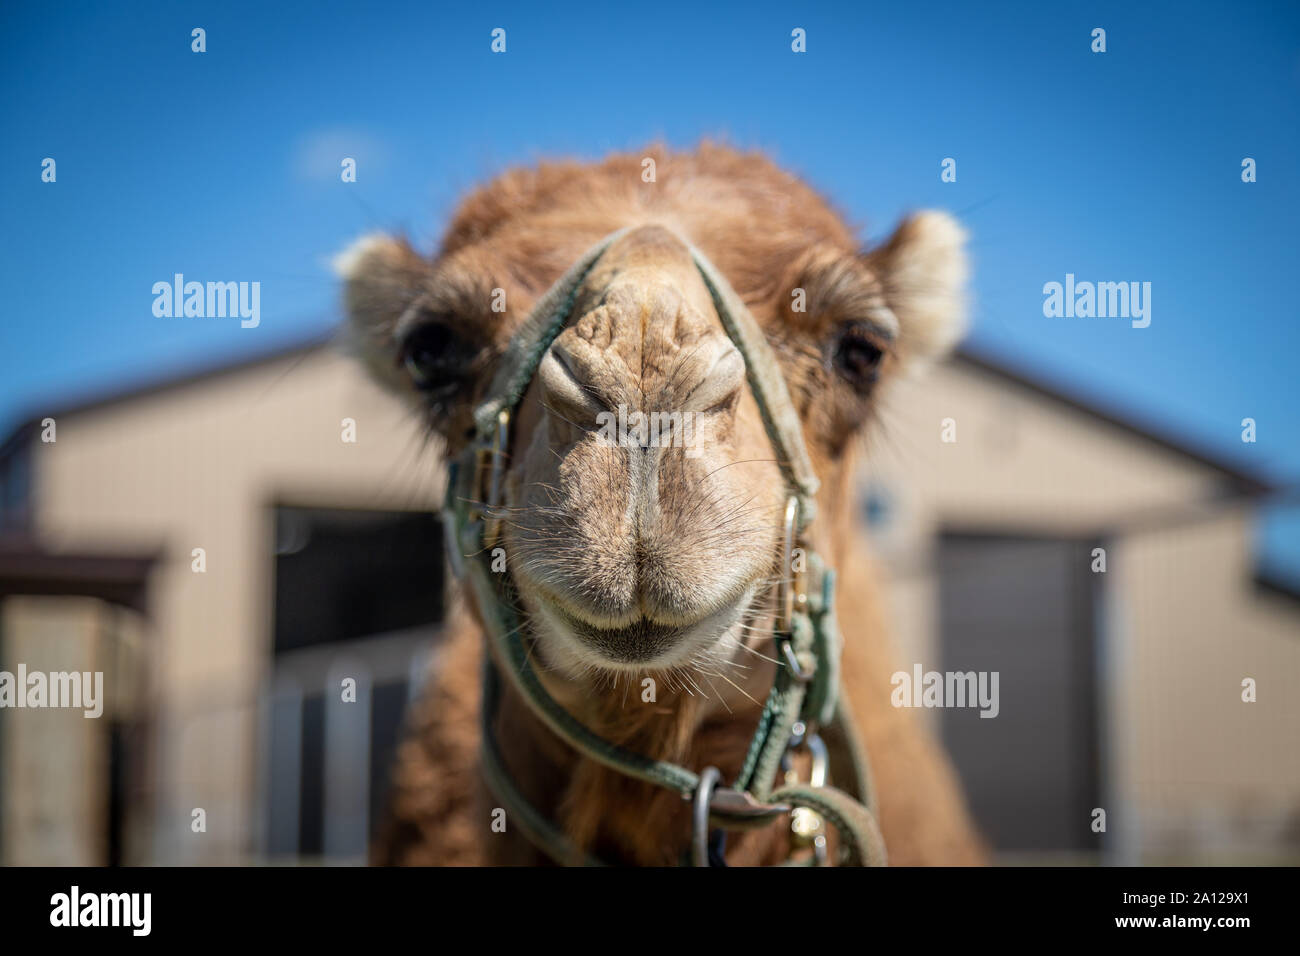 Close up of a dromedary camel at a private zoo in Michigan. Stock Photo